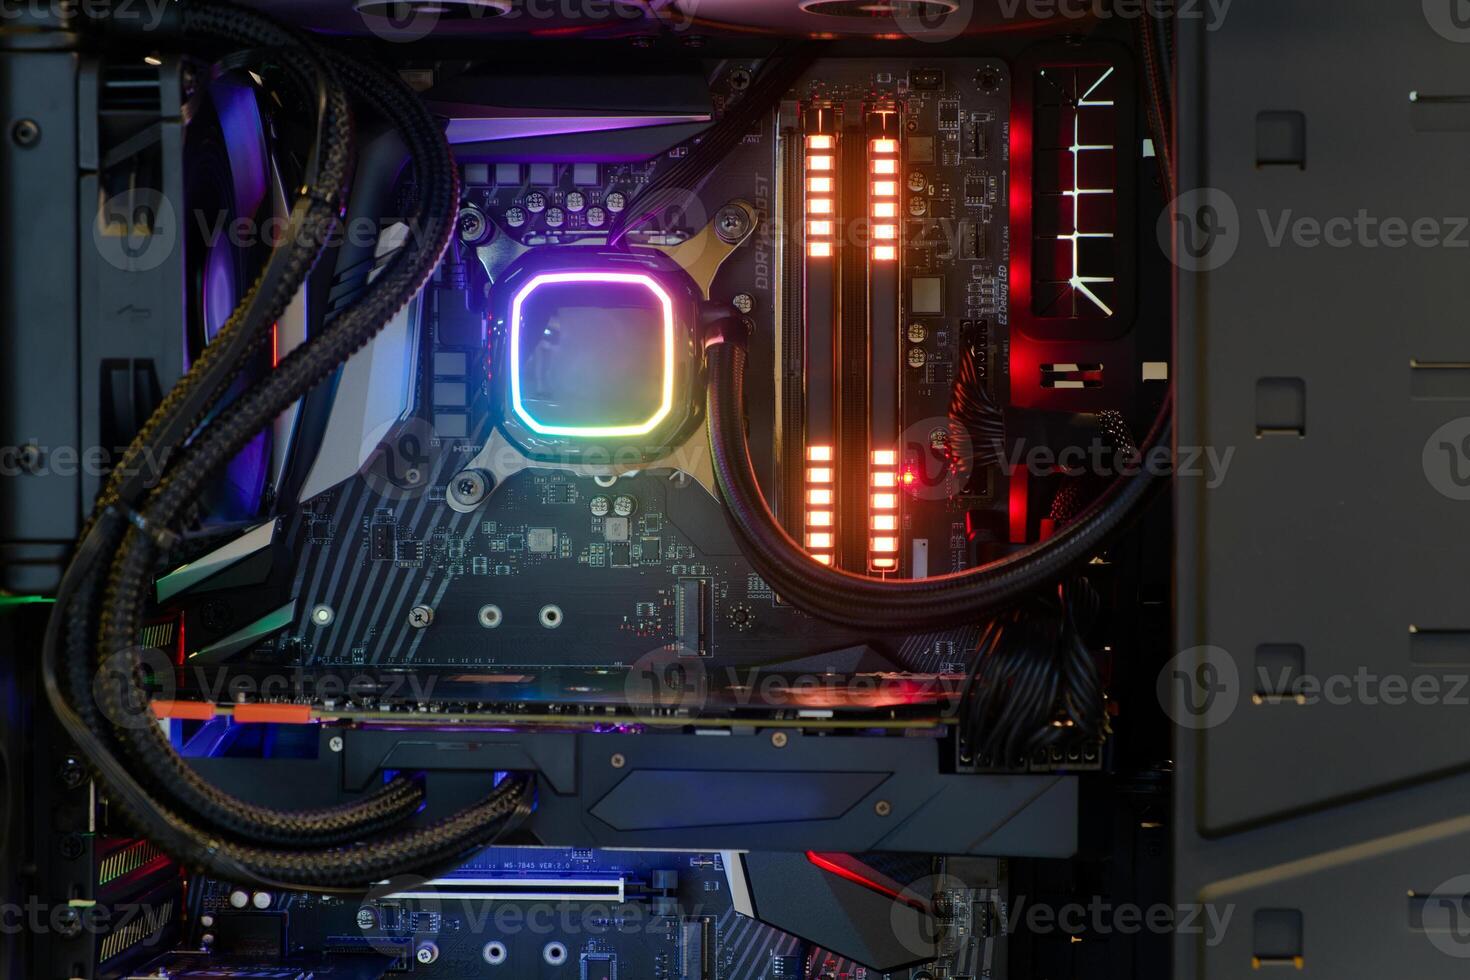 Inside Desktop PC Gaming and Water Cooling CPU with LED RGB Light Show  Status on Working Mode Stock Image - Image of modify, equipment: 151732609